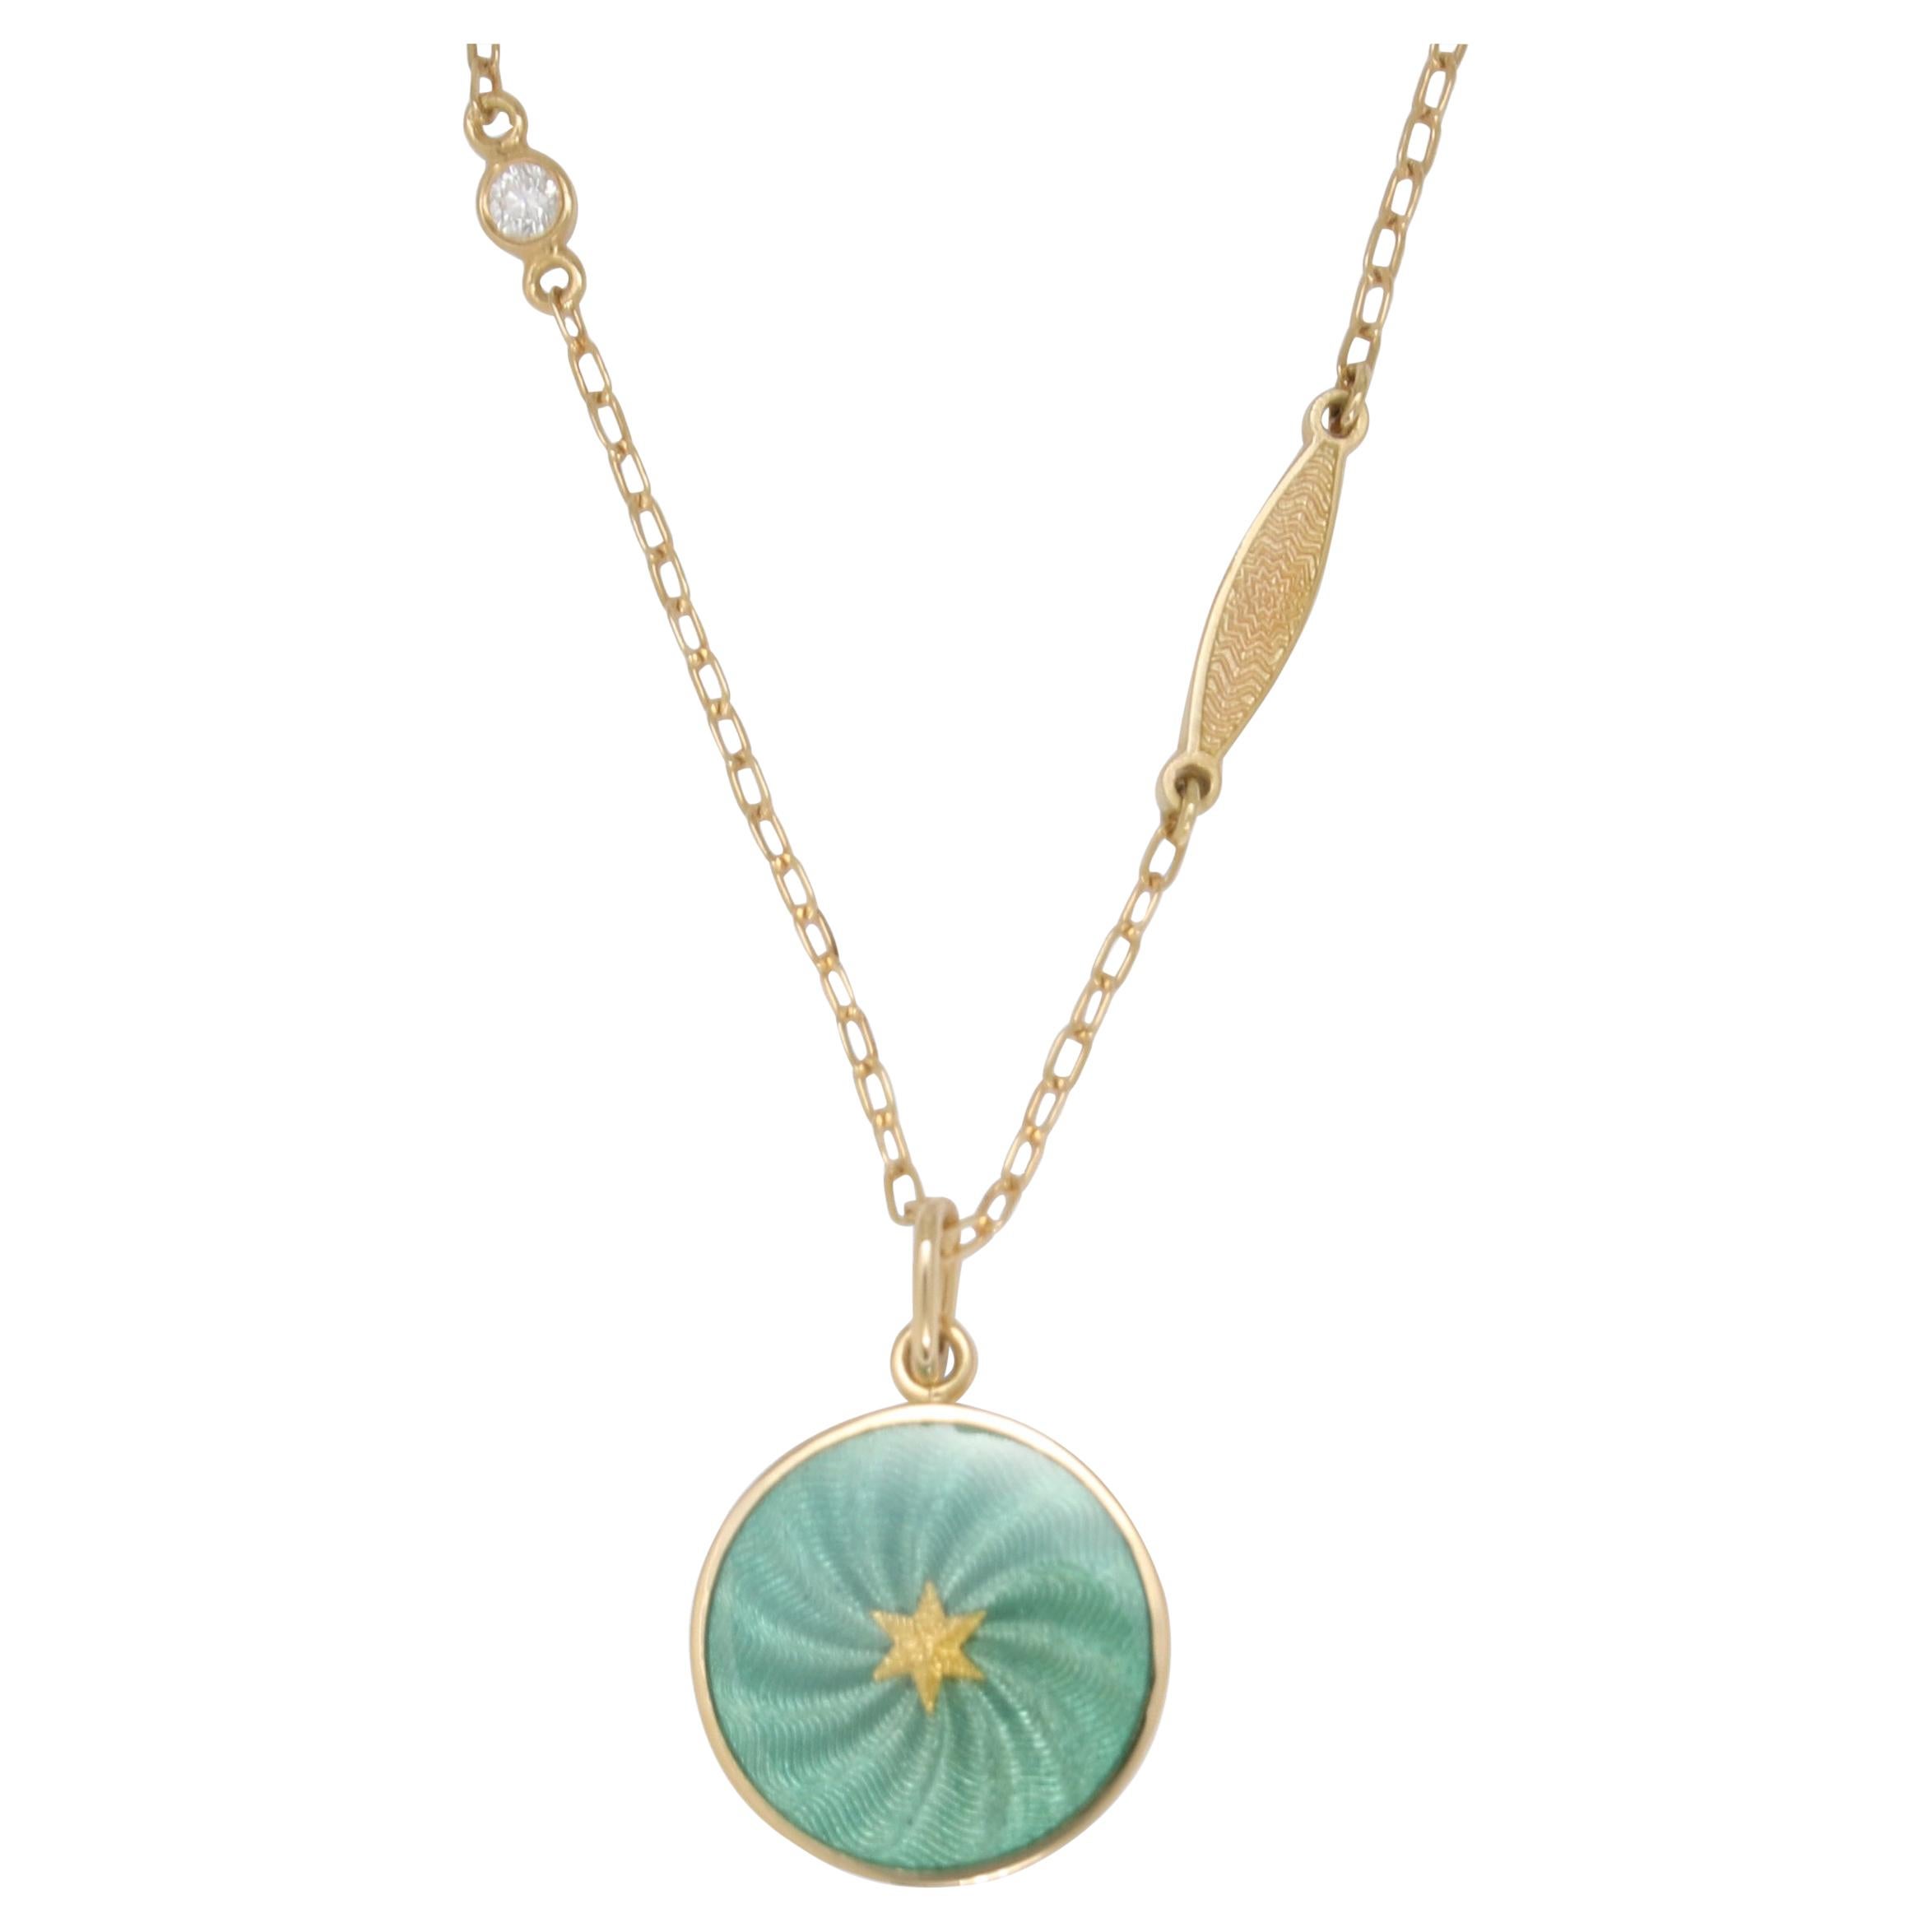 Round Disk Pendant 18k Yellow Gold Turquoise Enamel Guilloche Paillons 